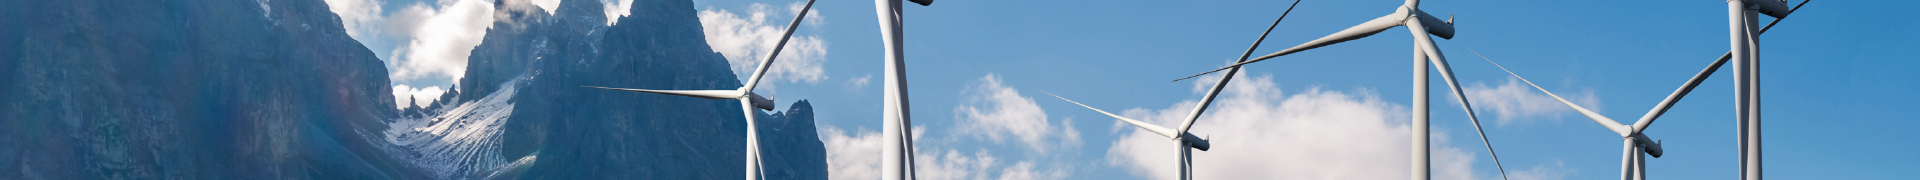 Safe and Reliable Installation and Maintenance of Wind Turbines Containing GAZ Batteries 